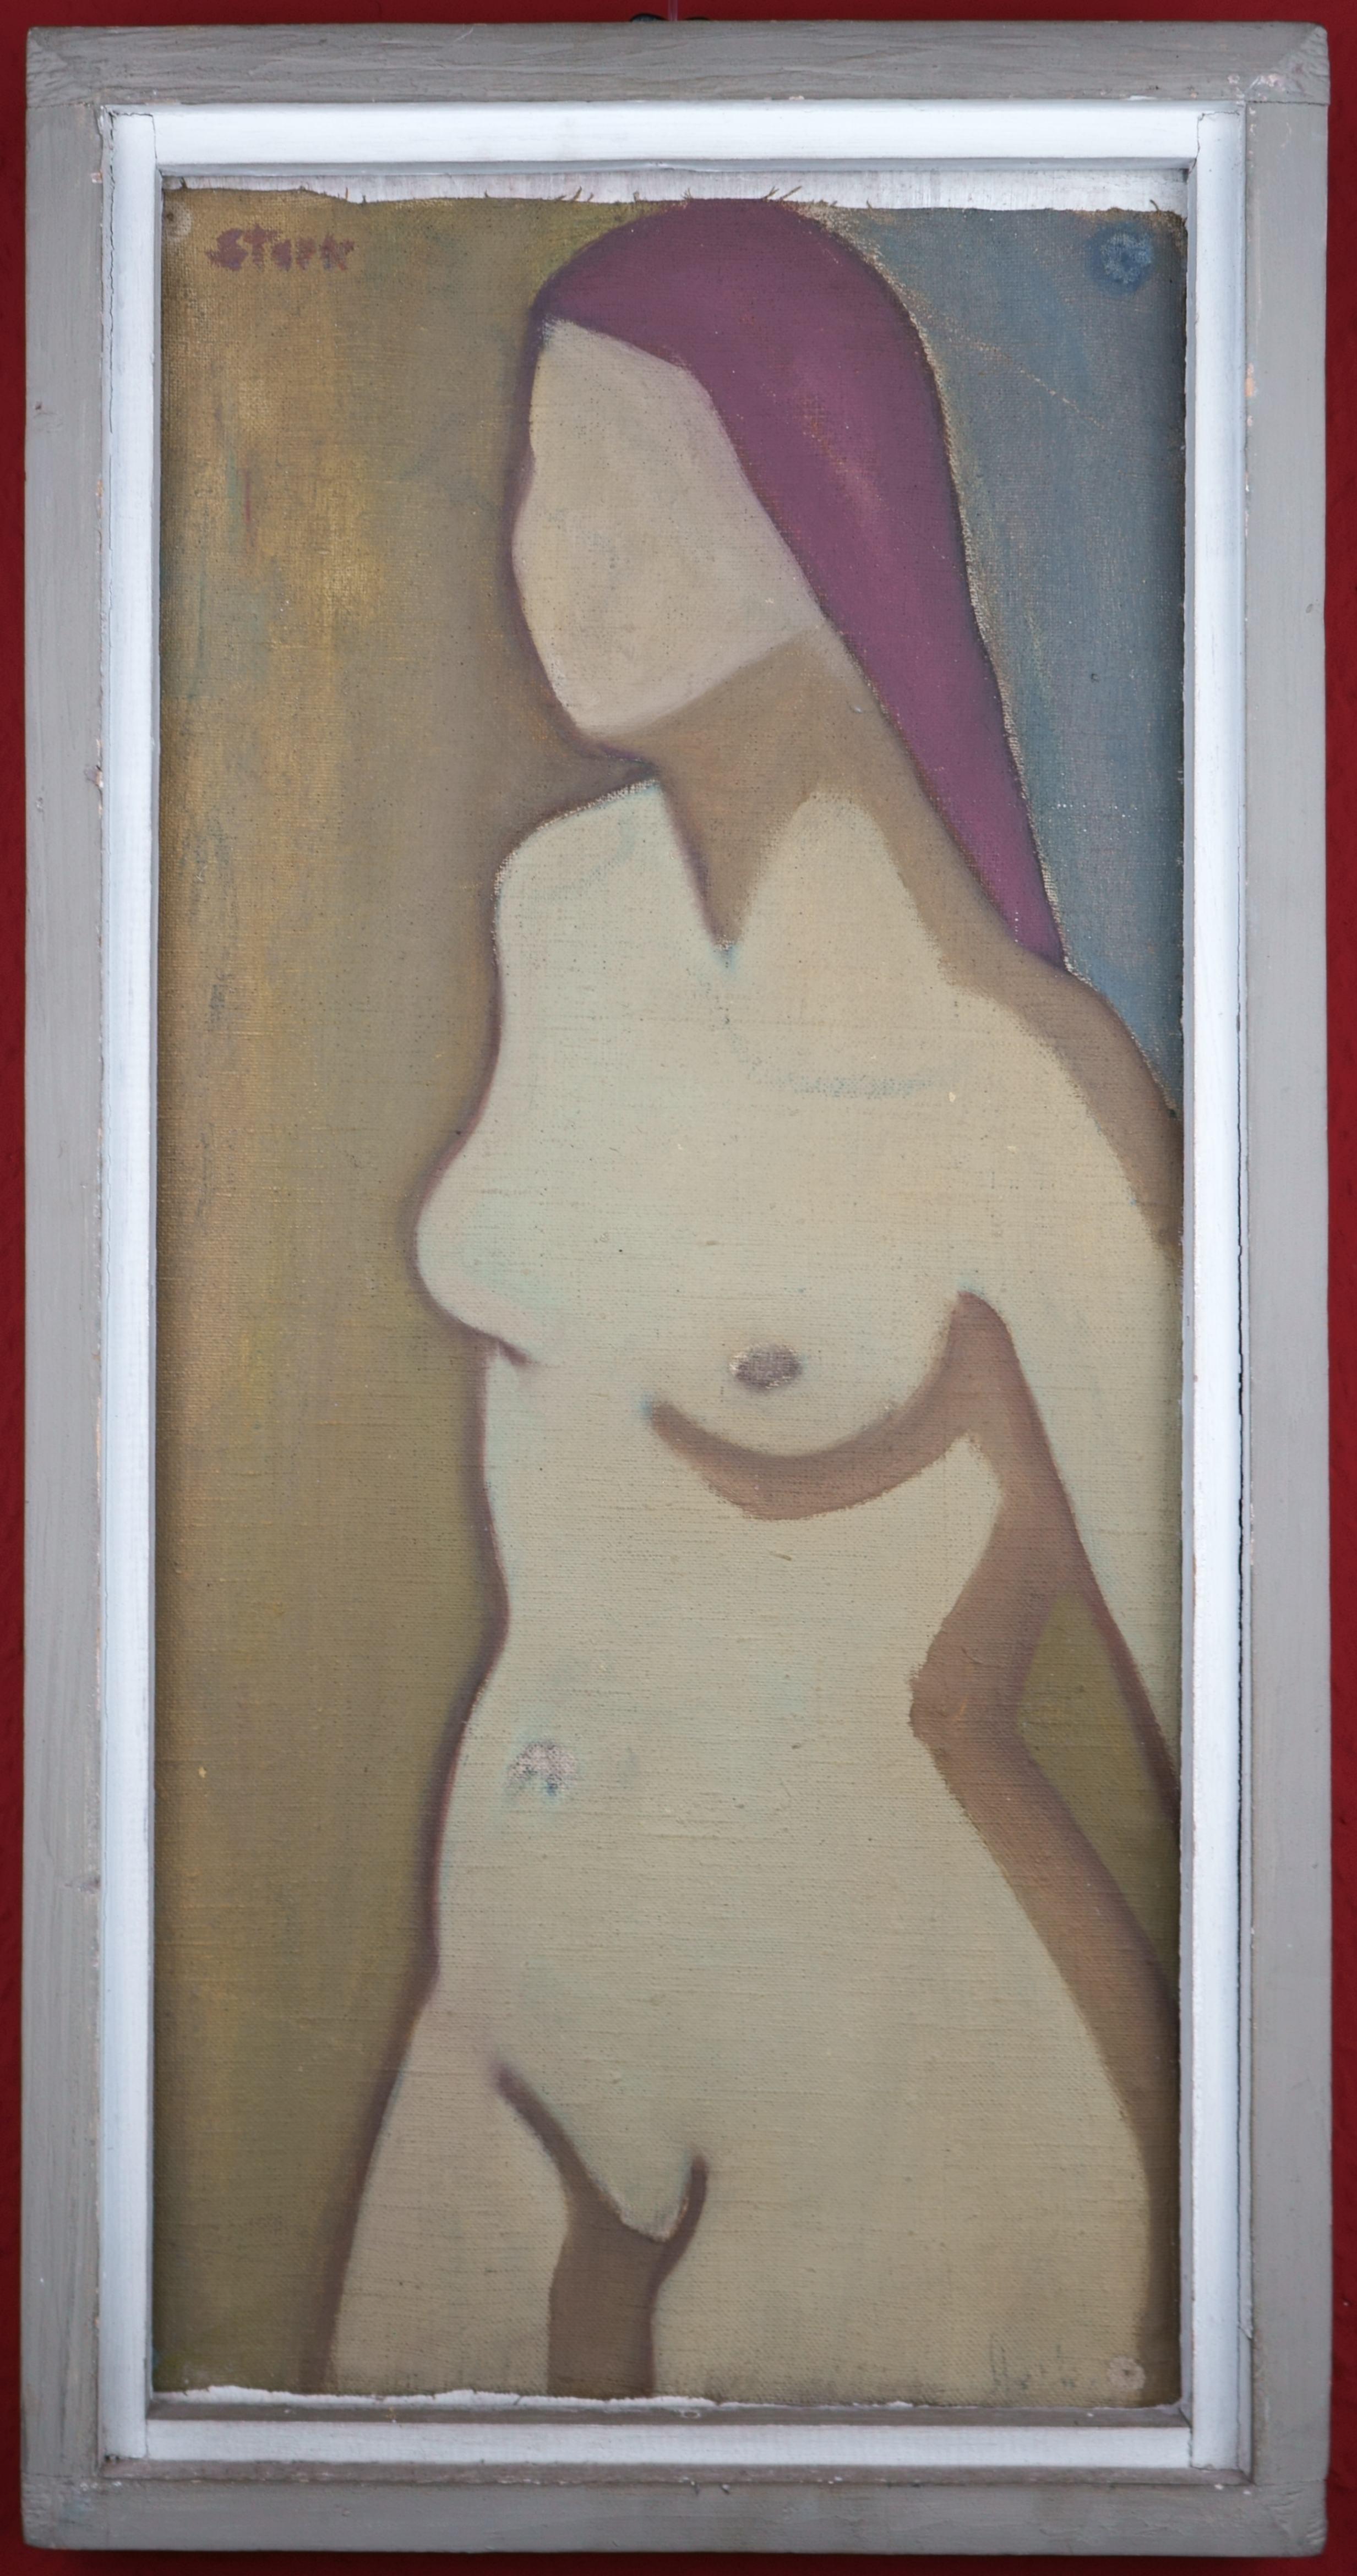 Gustl Stark (1917 Mainz - 2009 ibid.), Small Nude, 1946. Oil on canvas, marouflaged, 54 x 25 cm (picture), 30 x 60 cm (frame), signed 